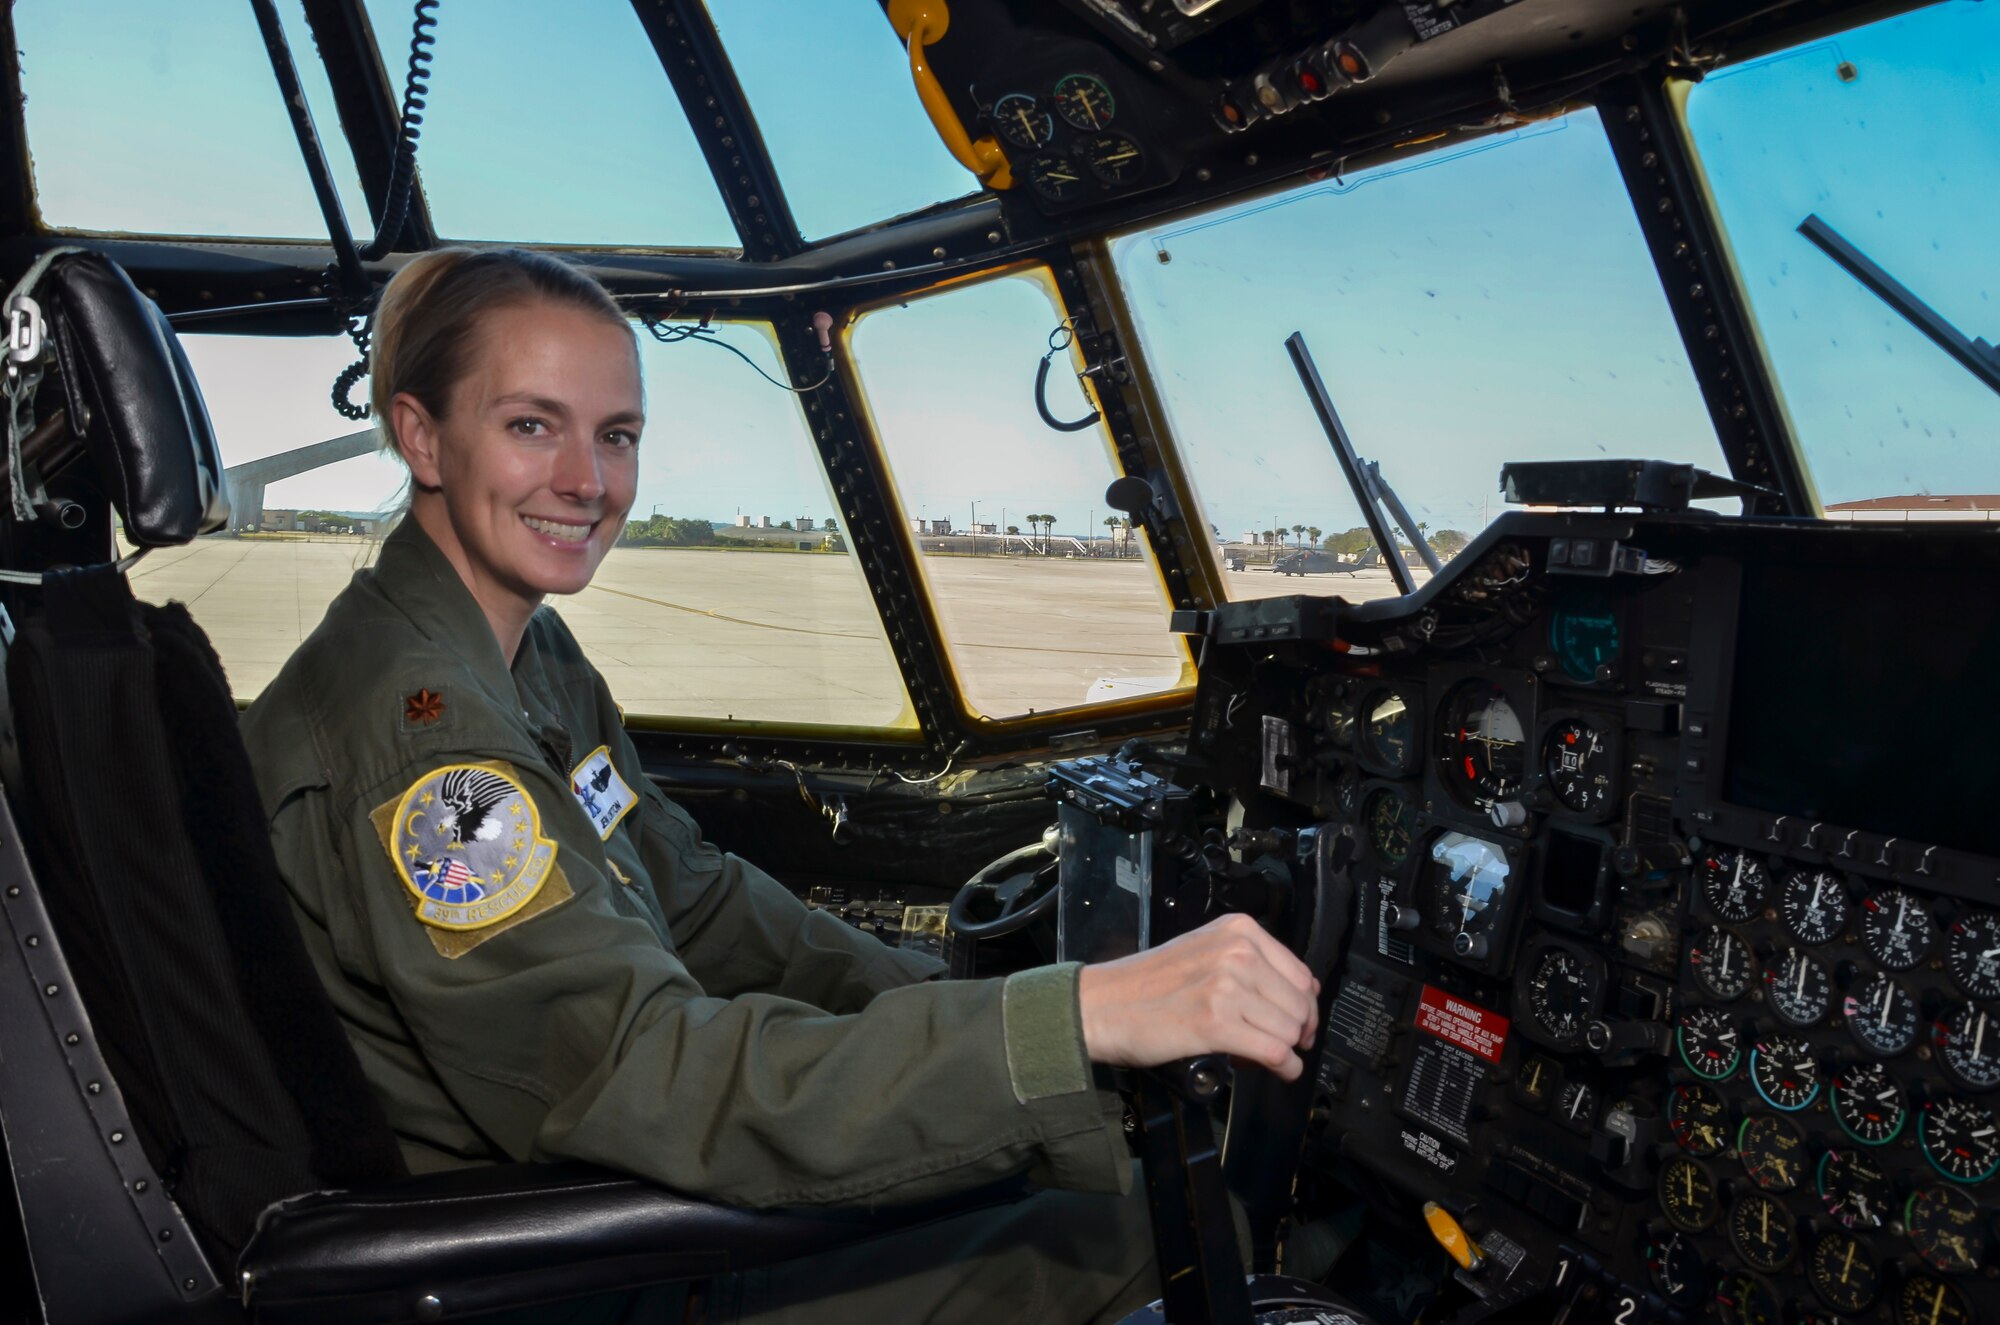 Maj. Jennifer Orton, a combat search and rescue (CSAR) pilot with the 39th Rescue Squadron here, flies the HC-130P/N King fixed-wing aerial refueling aircraft on missions for the 920th Rescue Wing. Orton recently discovered that according to the 39th RSQ she holds the title of being their first female Air Force Reserve fixed-wing CSAR pilot. (U.S. Photo by Senior Airman Brandon Kalloo Sanes) 